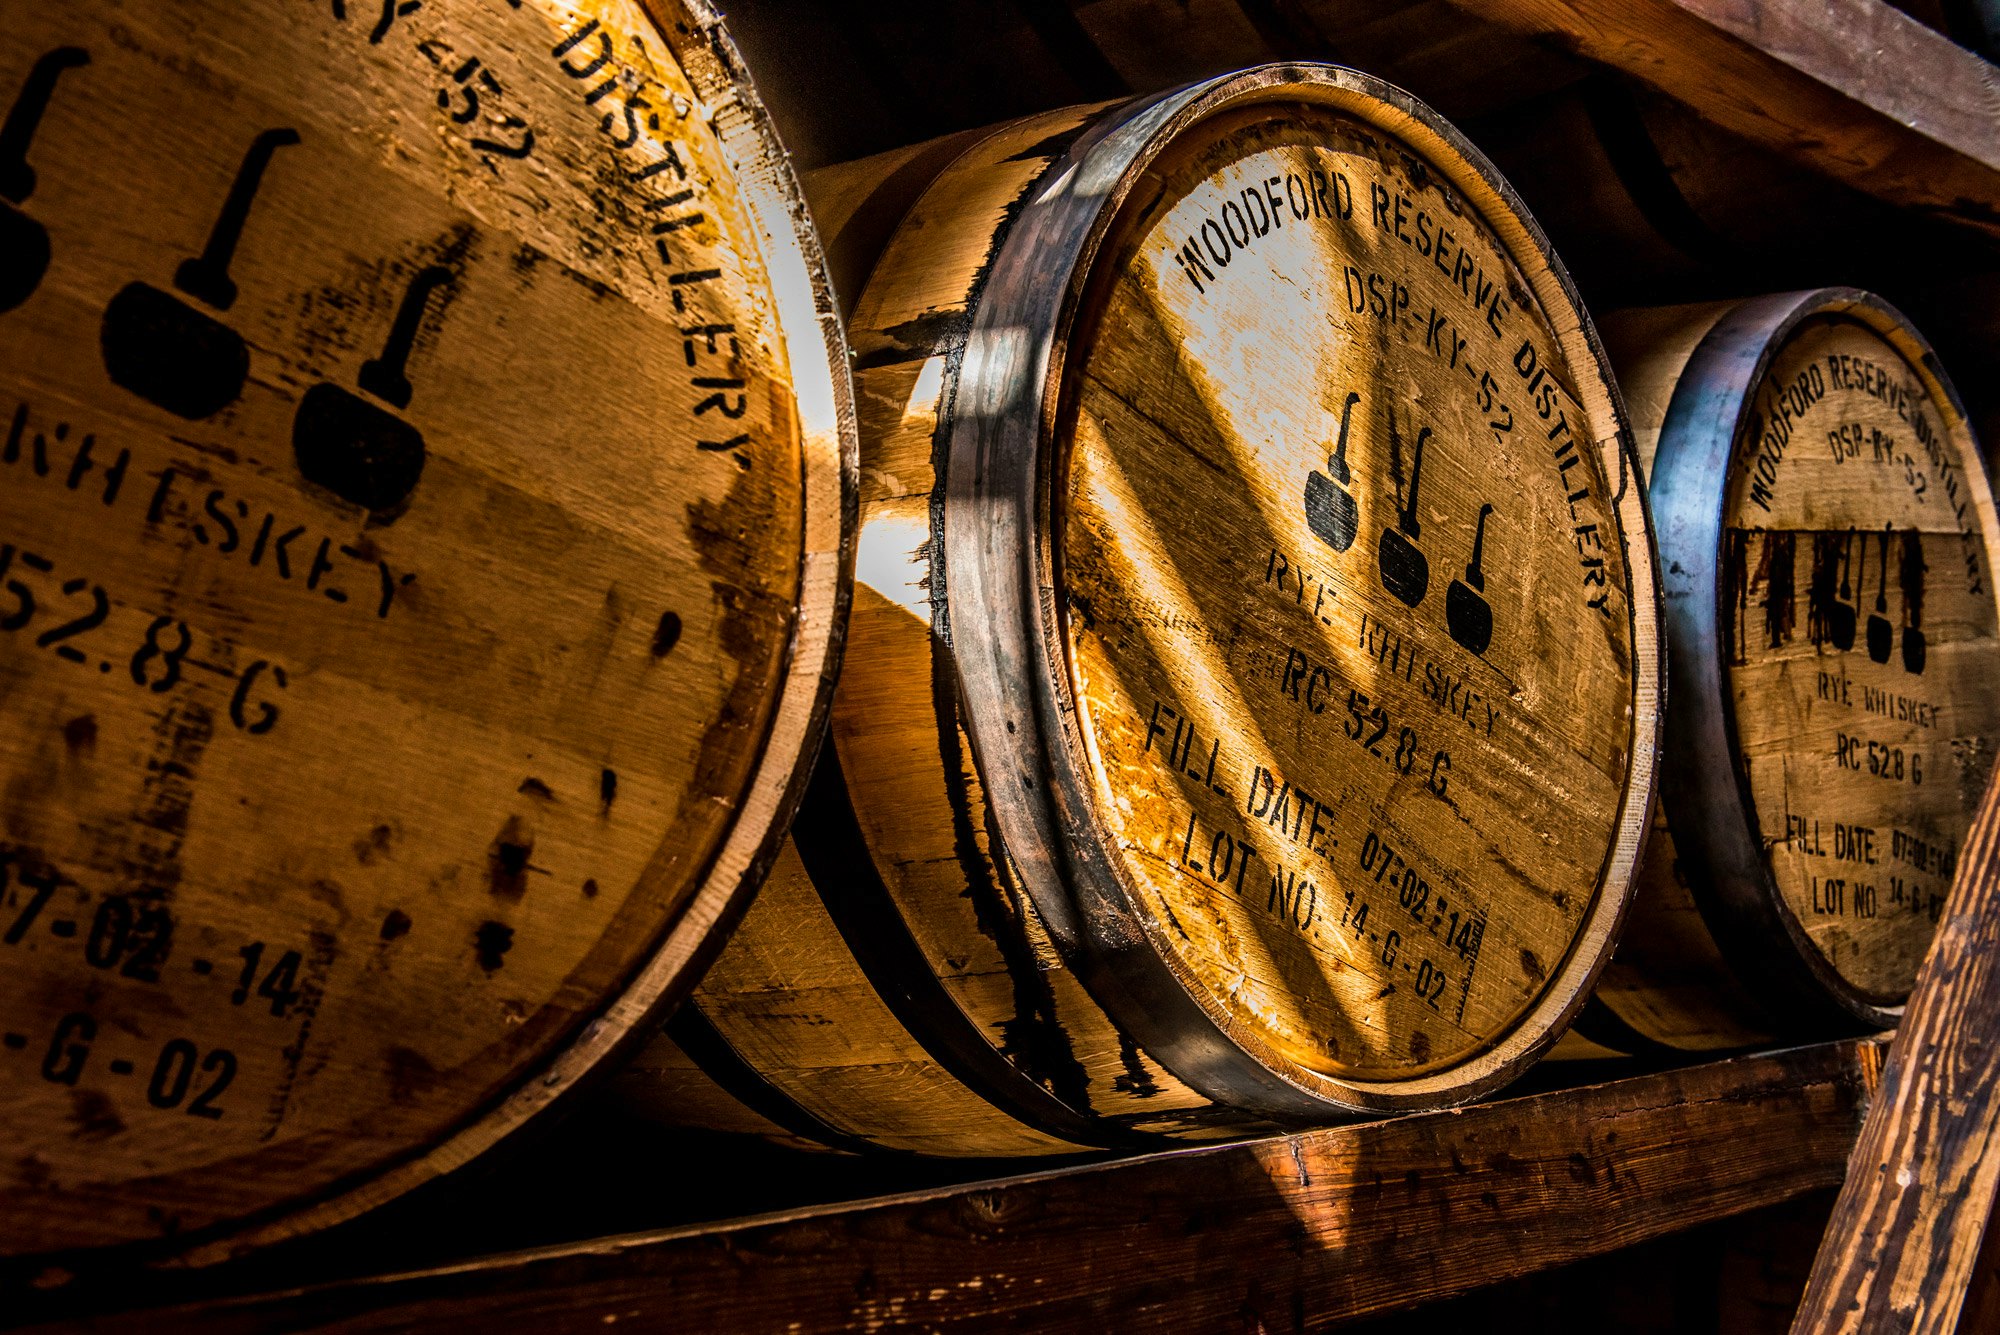 Whiskey barrels at the Woodford Reserve Distillery, Kentucky © thomas carr / Shutterstock